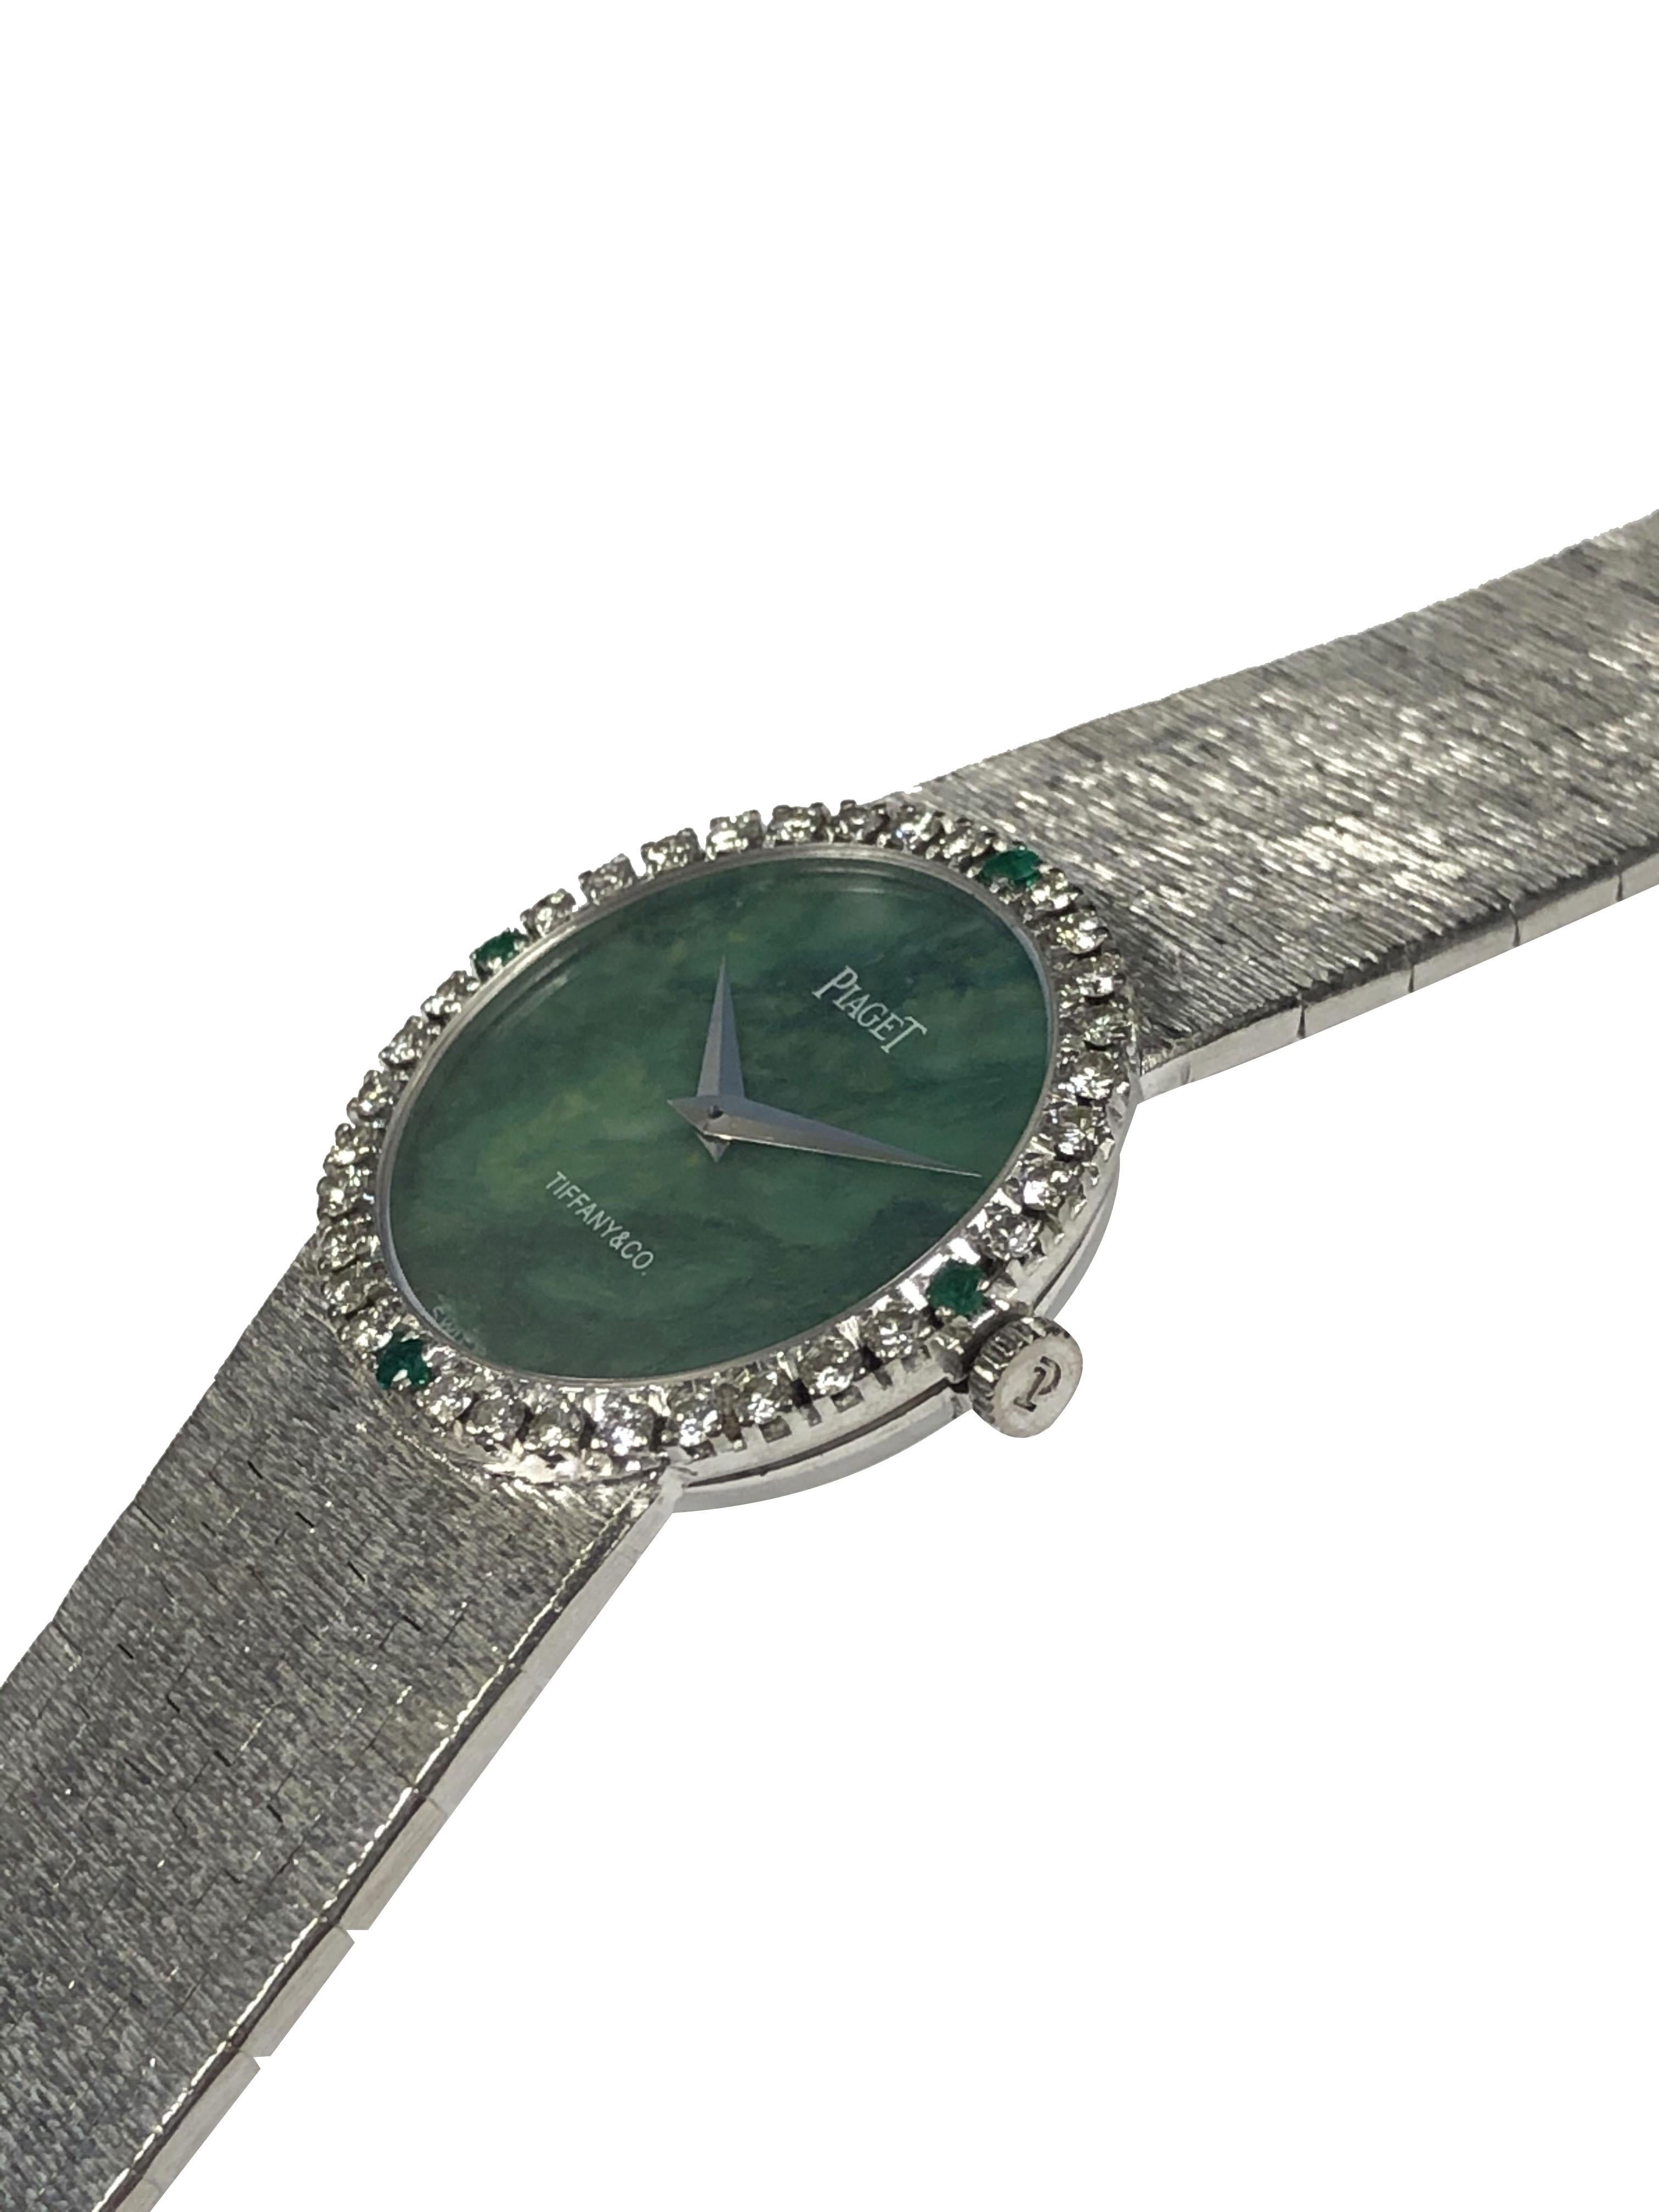 Circa 1970s Piaget For Tiffany & Company Ladies Bracelet Watch, 24 M.M. 2 Piece 18k White Gold case with Round Brilliant cut Diamonds and Emeralds Bezel, Jadite Jade Dial. 17 Jewel Mechanical, Manual wind movement. 5/8 inch wide White Gold textured